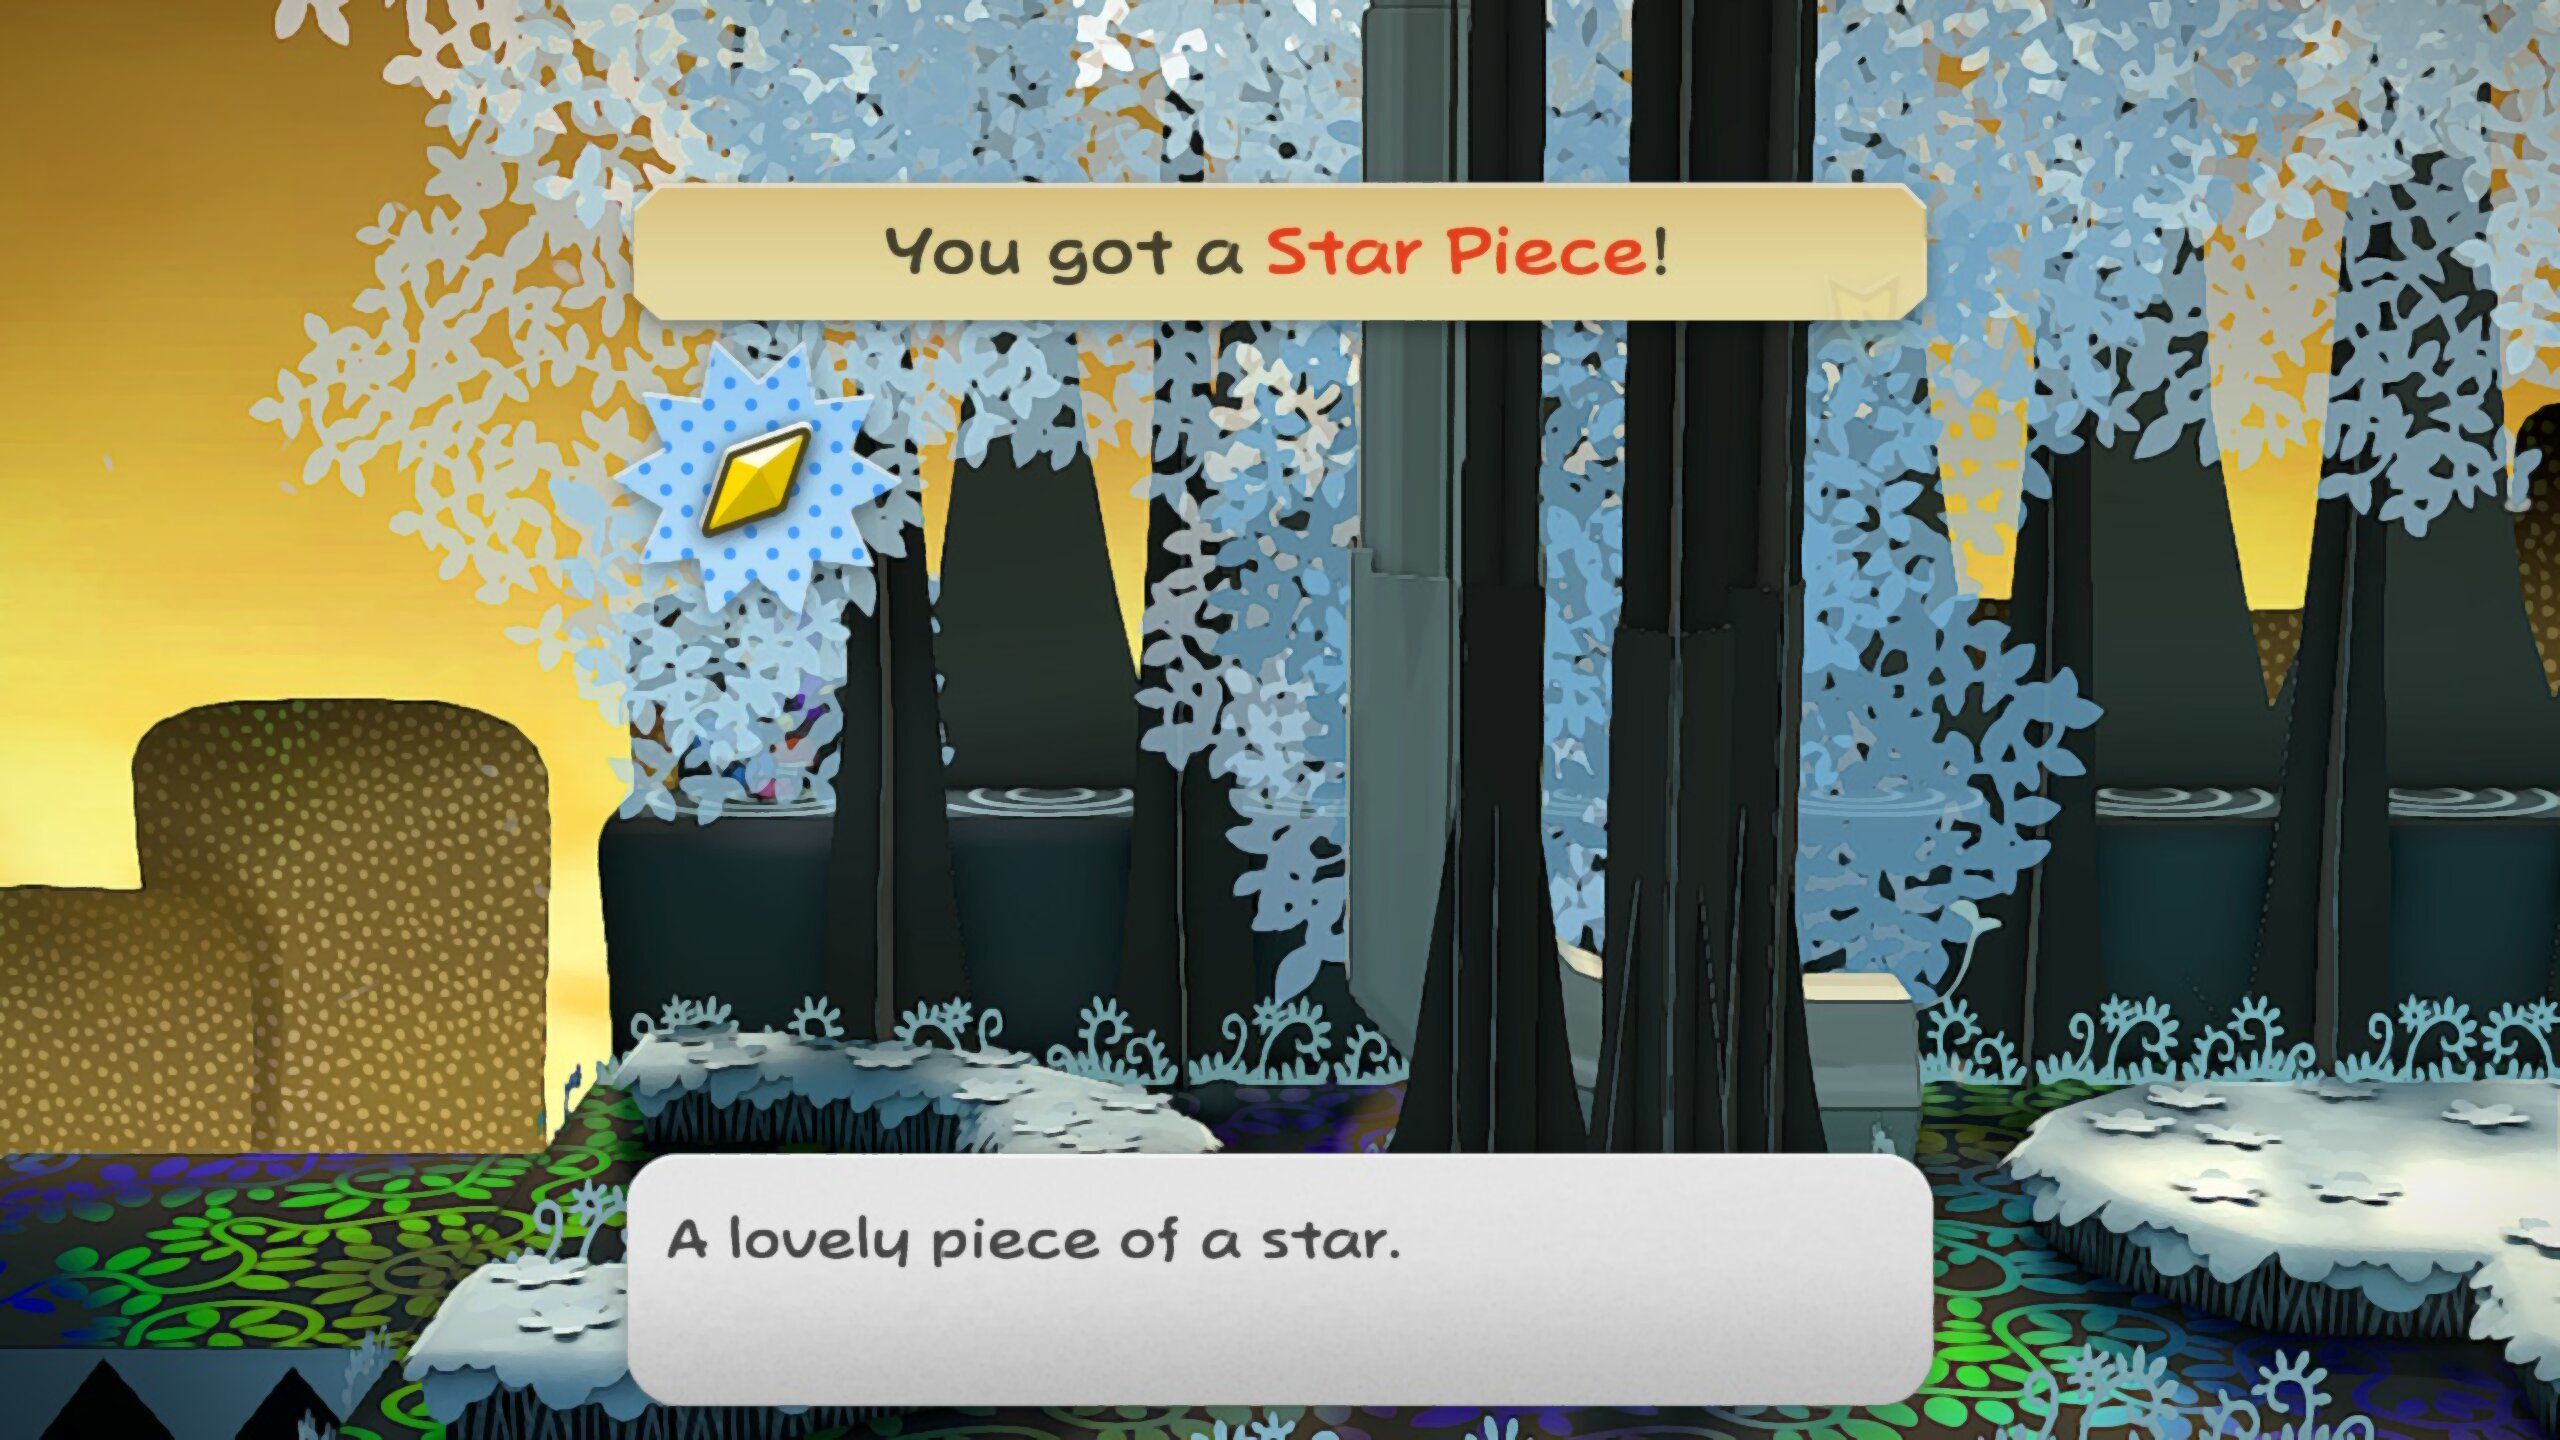 Image of a star piece in boggly woods in Paper Mario TTYD